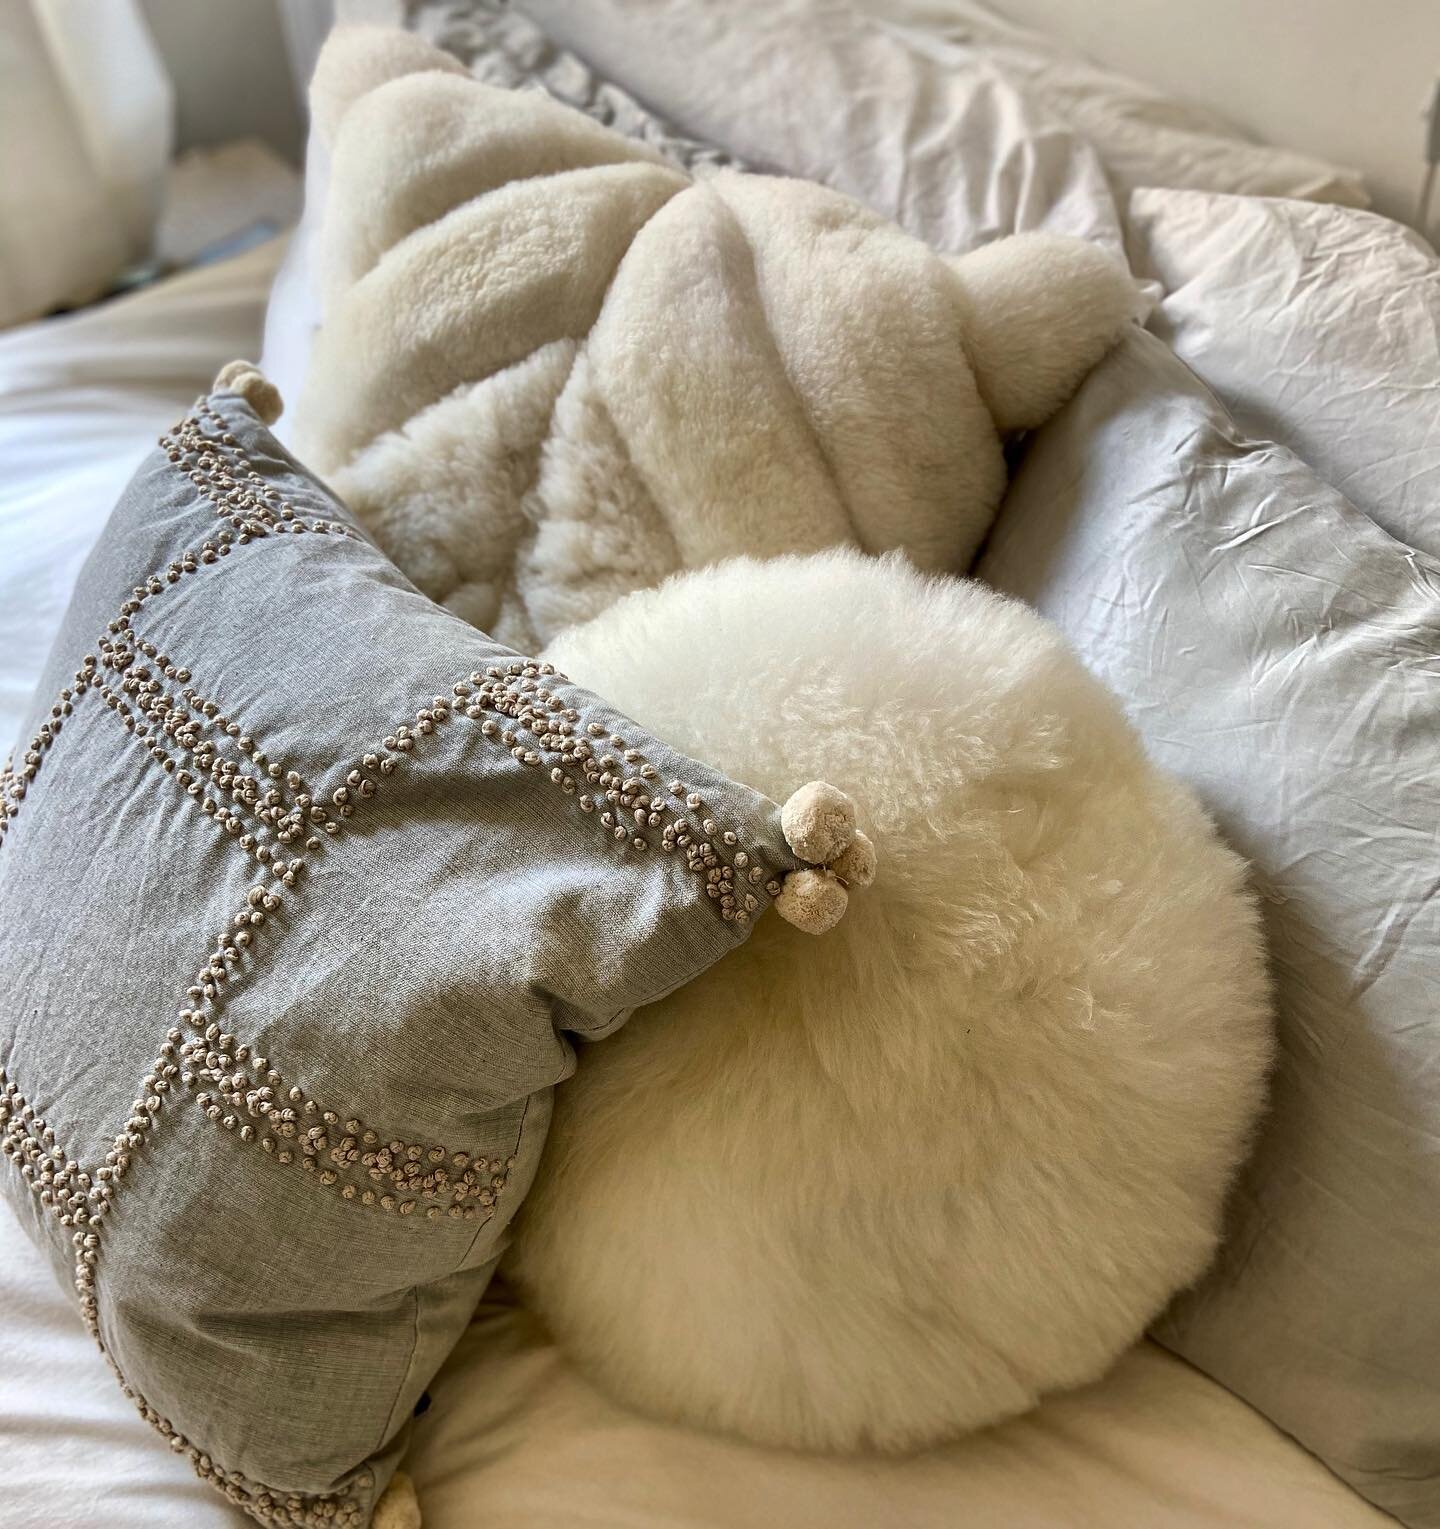 Pillow game is serious business chez Natty. A) silk pillowcases are totally worth the hype IMO. Especially if you tend to smash your face into your pillow and wake up looking like a raisin. Hi, me. 🙋🏼&zwj;♀️ Or if you just wanna feel like a queen w